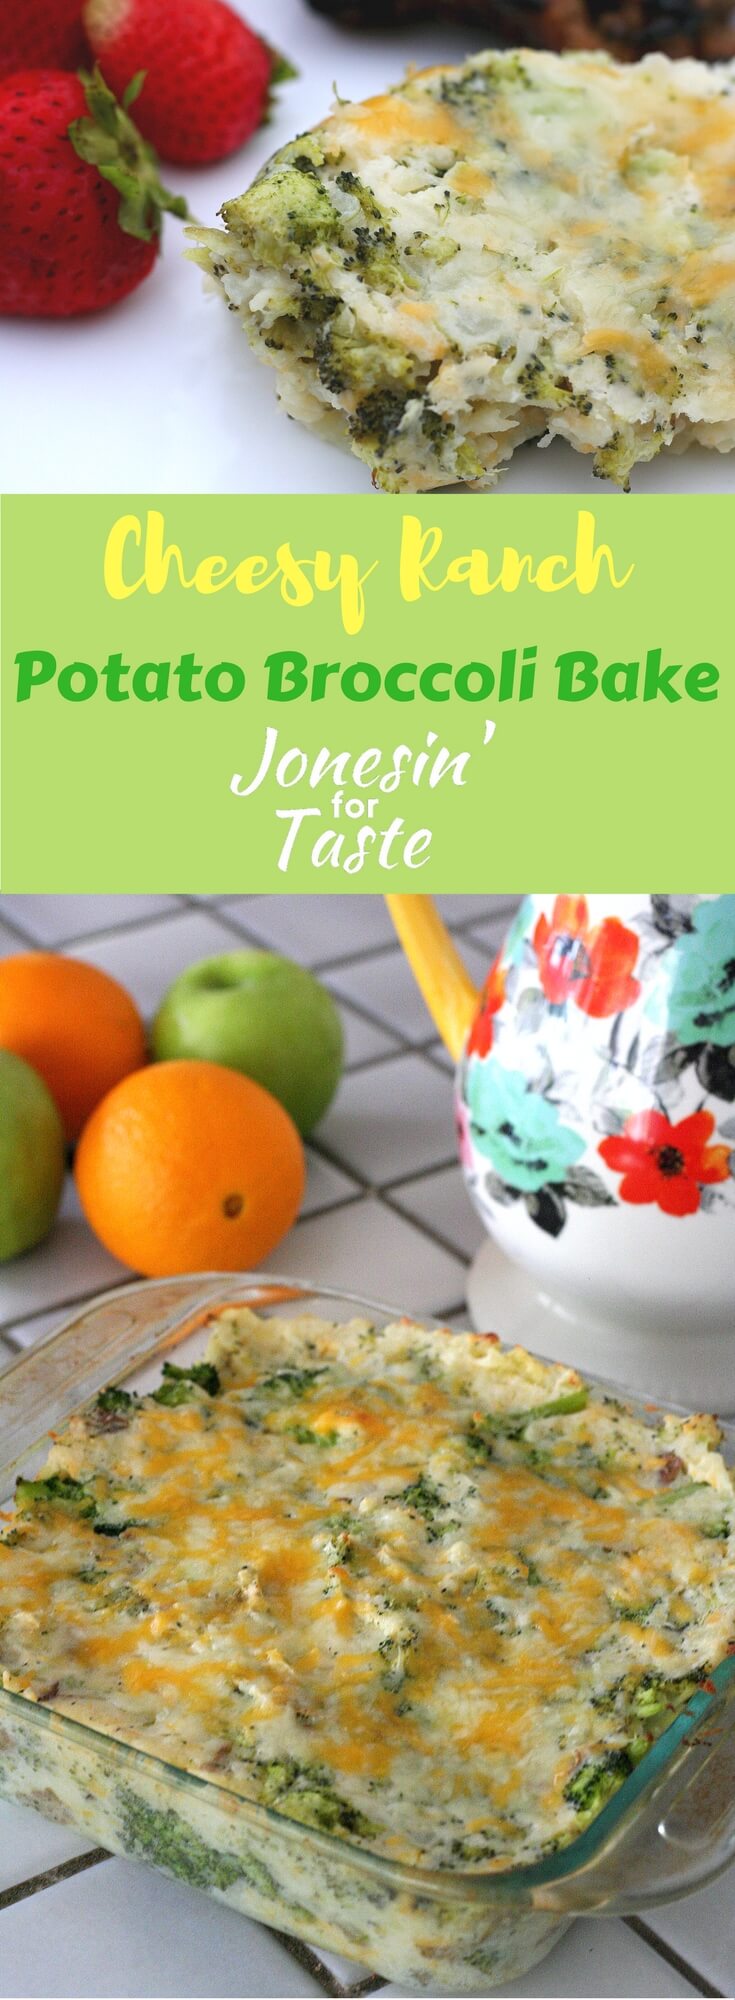 Cheesy Ranch Potato Broccoli Bake take the deliciousness of twice baked potatoes and turning them into a casserole loaded with cheese, ranch, and broccoli. Kid friendly and easy to make for a crowd.